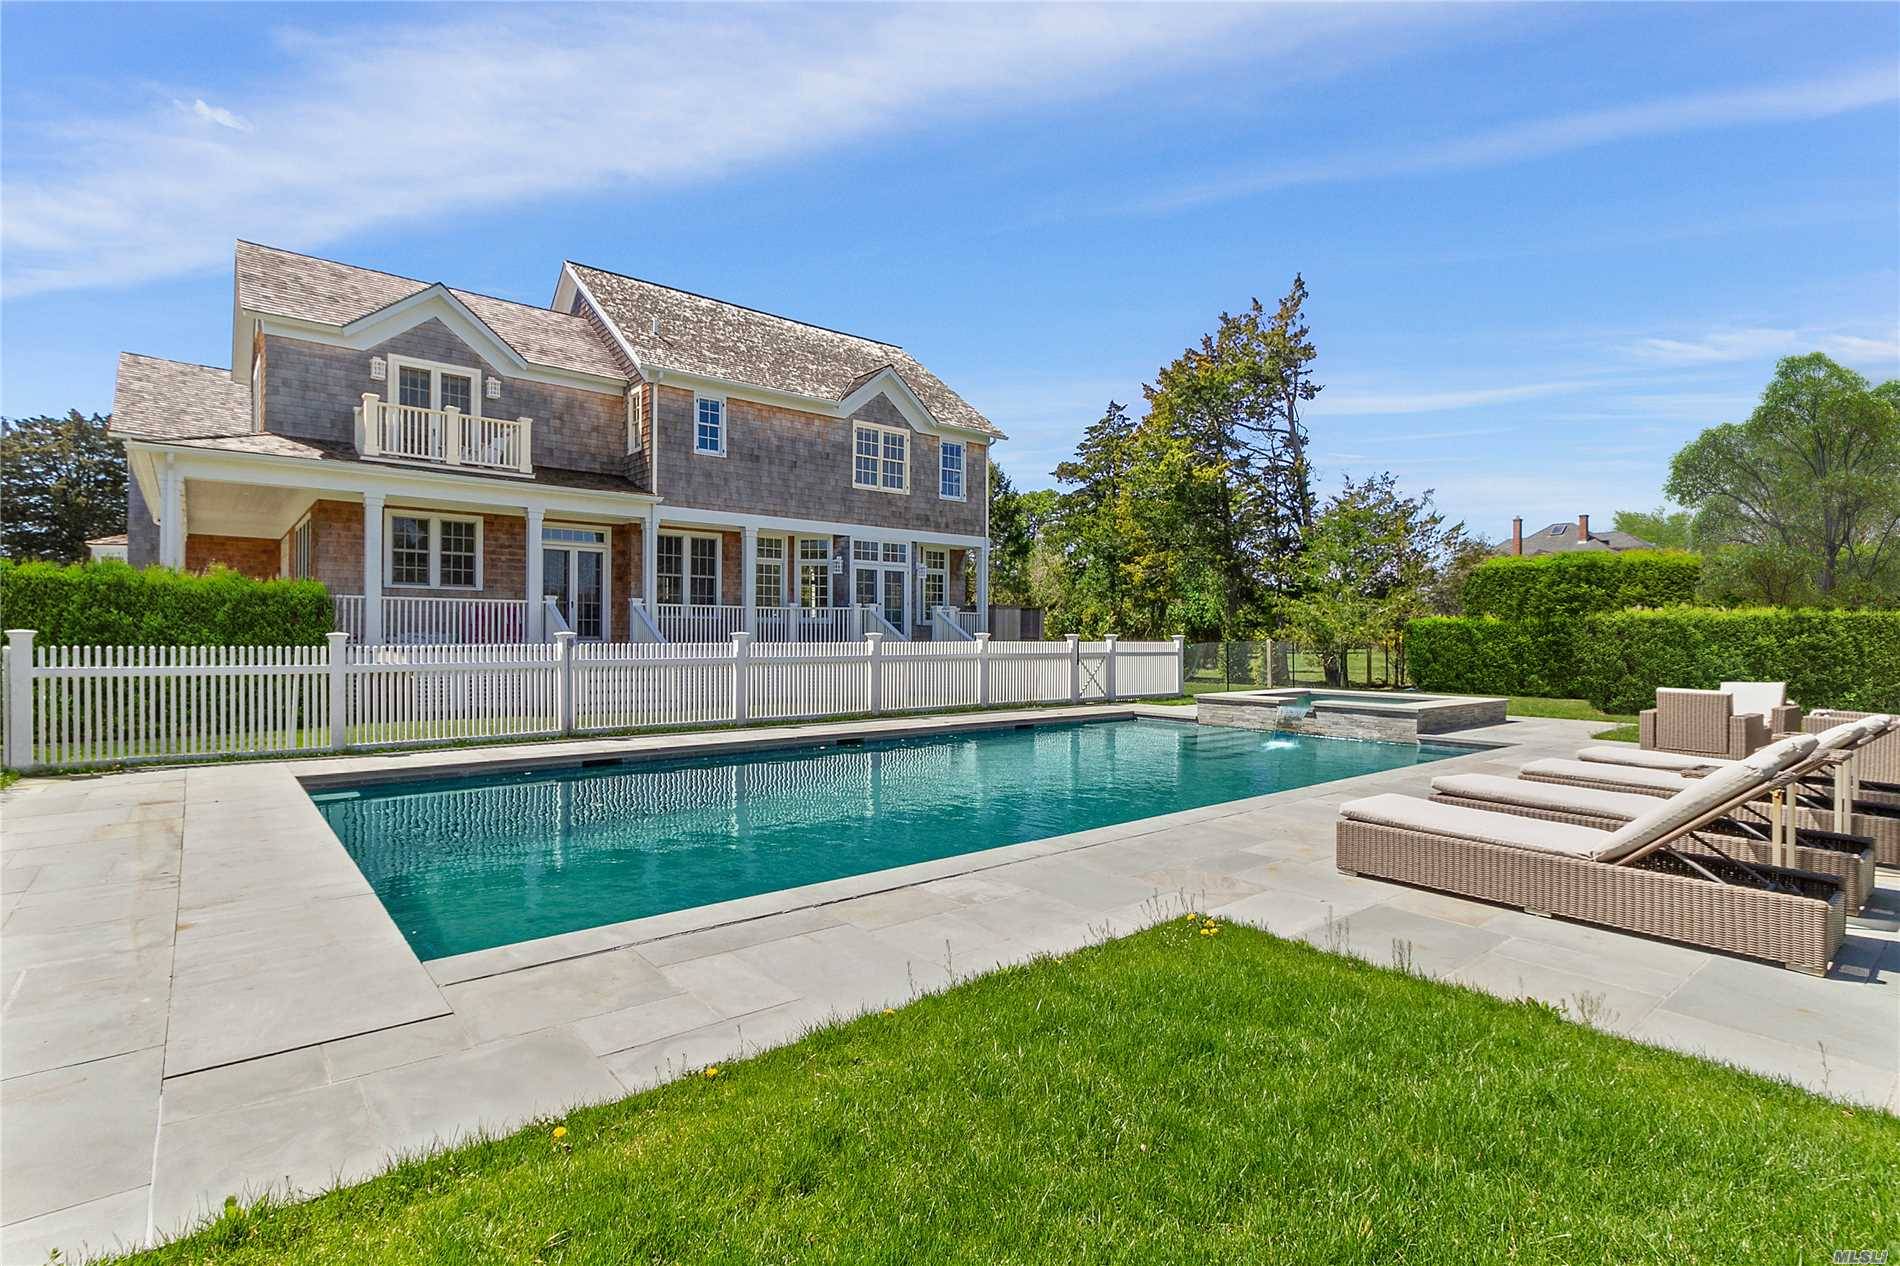 Located in the heart of the Westhampton Beach village estate section, this beautifully crafted Hamptons cedar shake beach house stands tall.